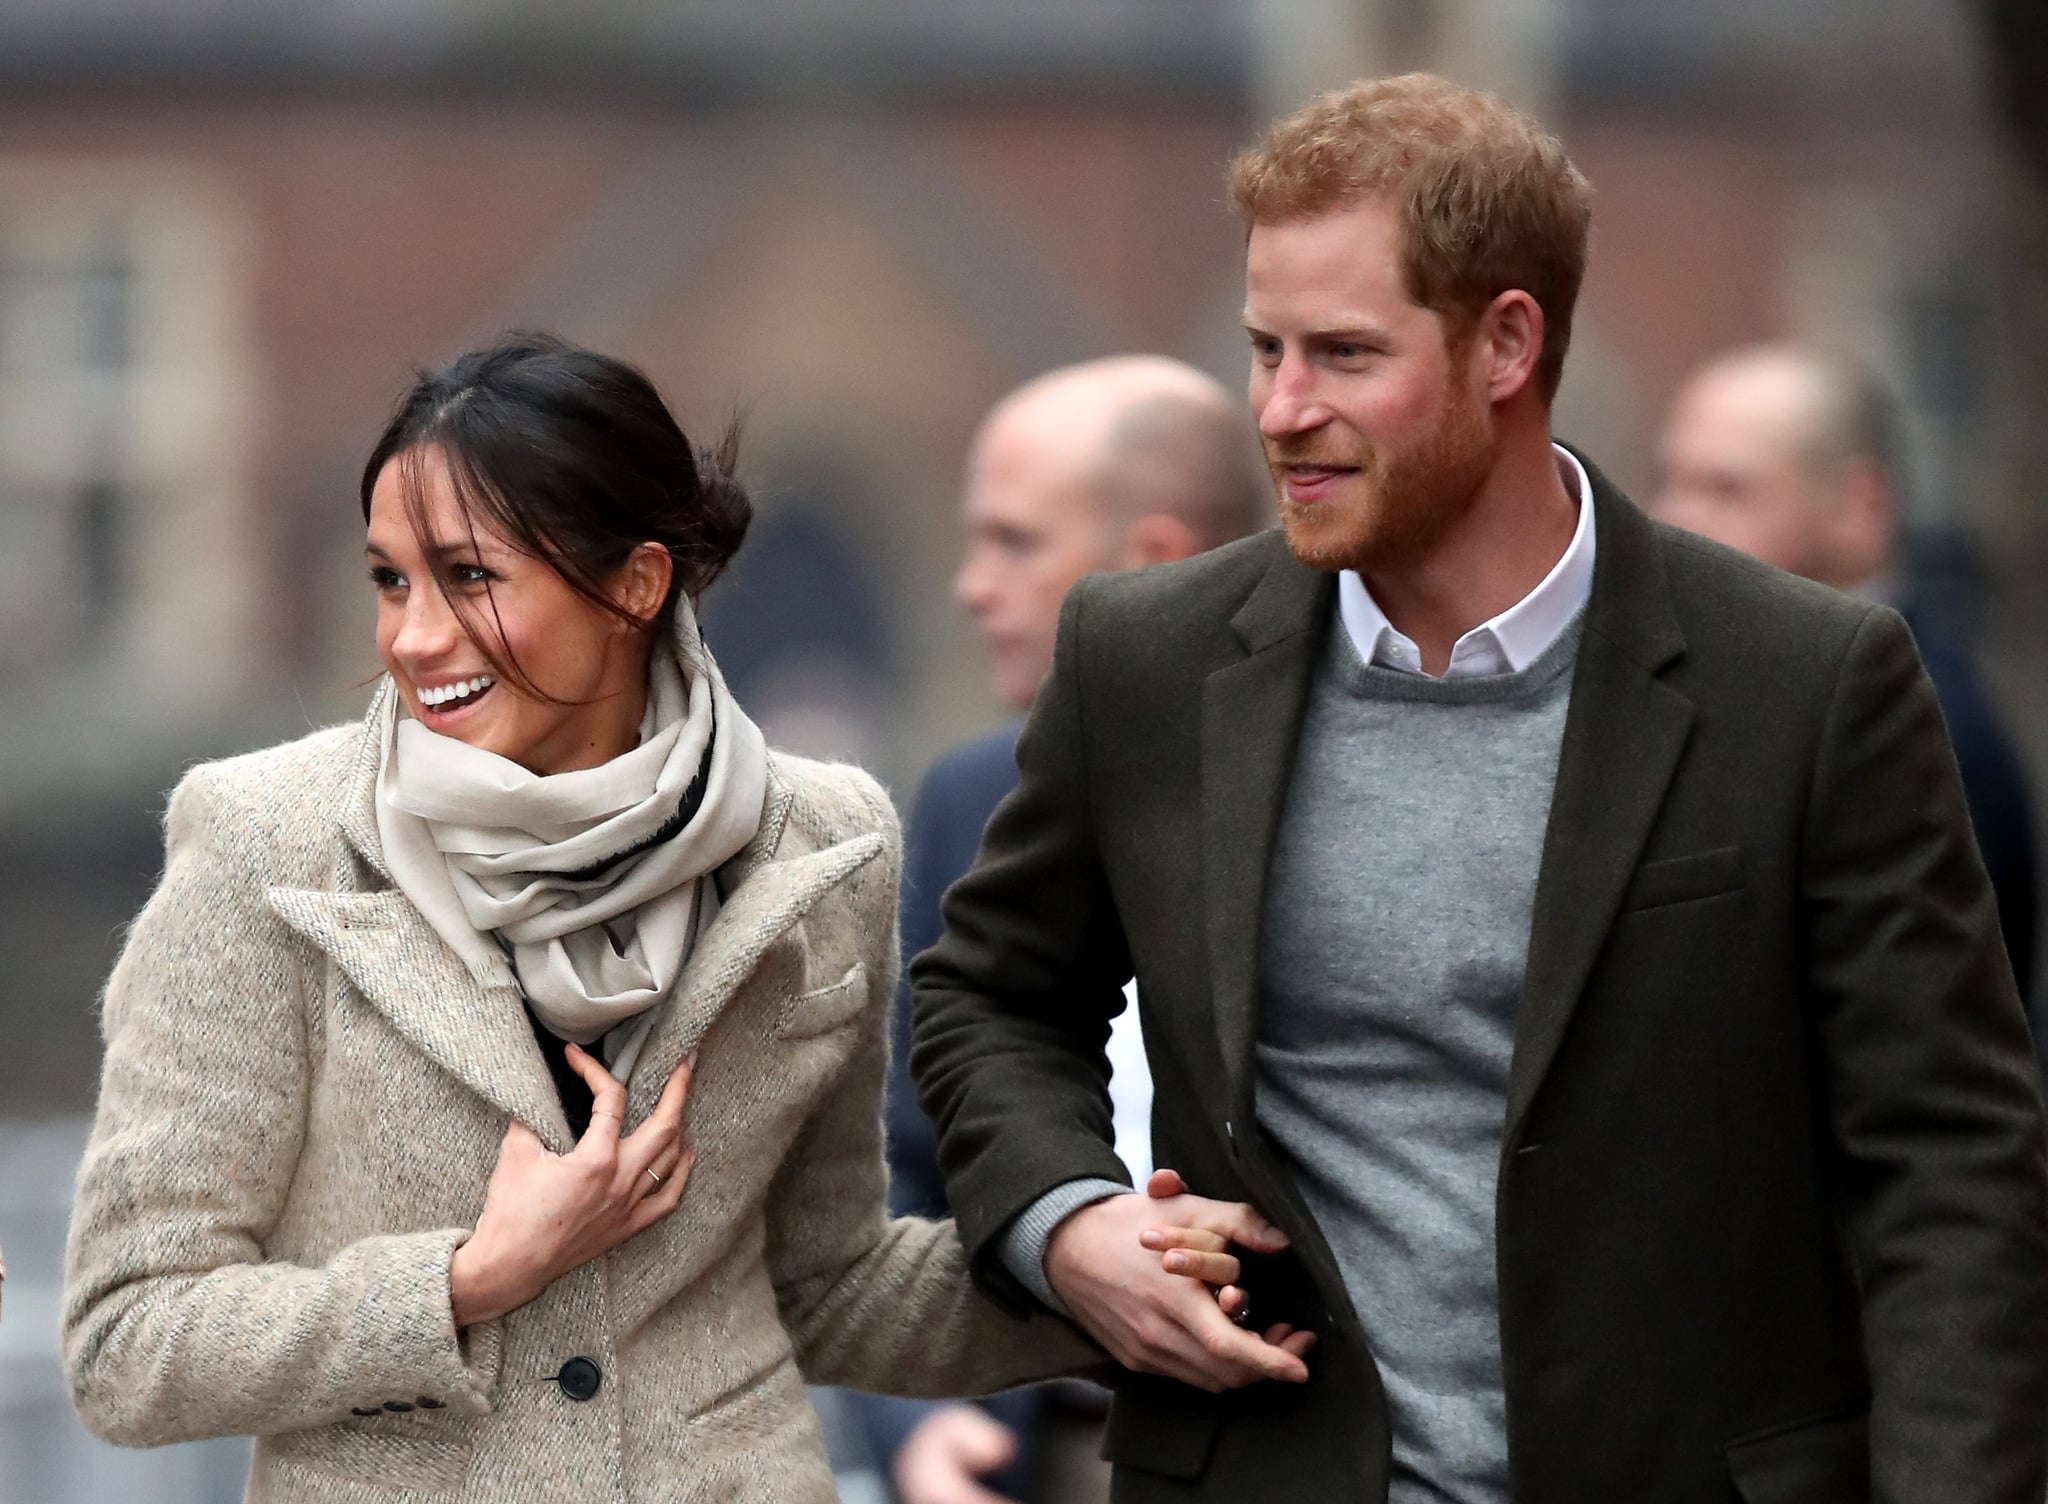 LONDON, ENGLAND - JANUARY 09:  Prince Harry (R) and his fiancee Meghan Markle visit Reprezent 107.3FM on January 9, 2018 in London, England. The Reprezent training programme was established in Peckham in 2008, in response to the alarming rise in knife crime, to help young people develop and socialise through radio.  (Photo by Chris Jackson/Getty Images)